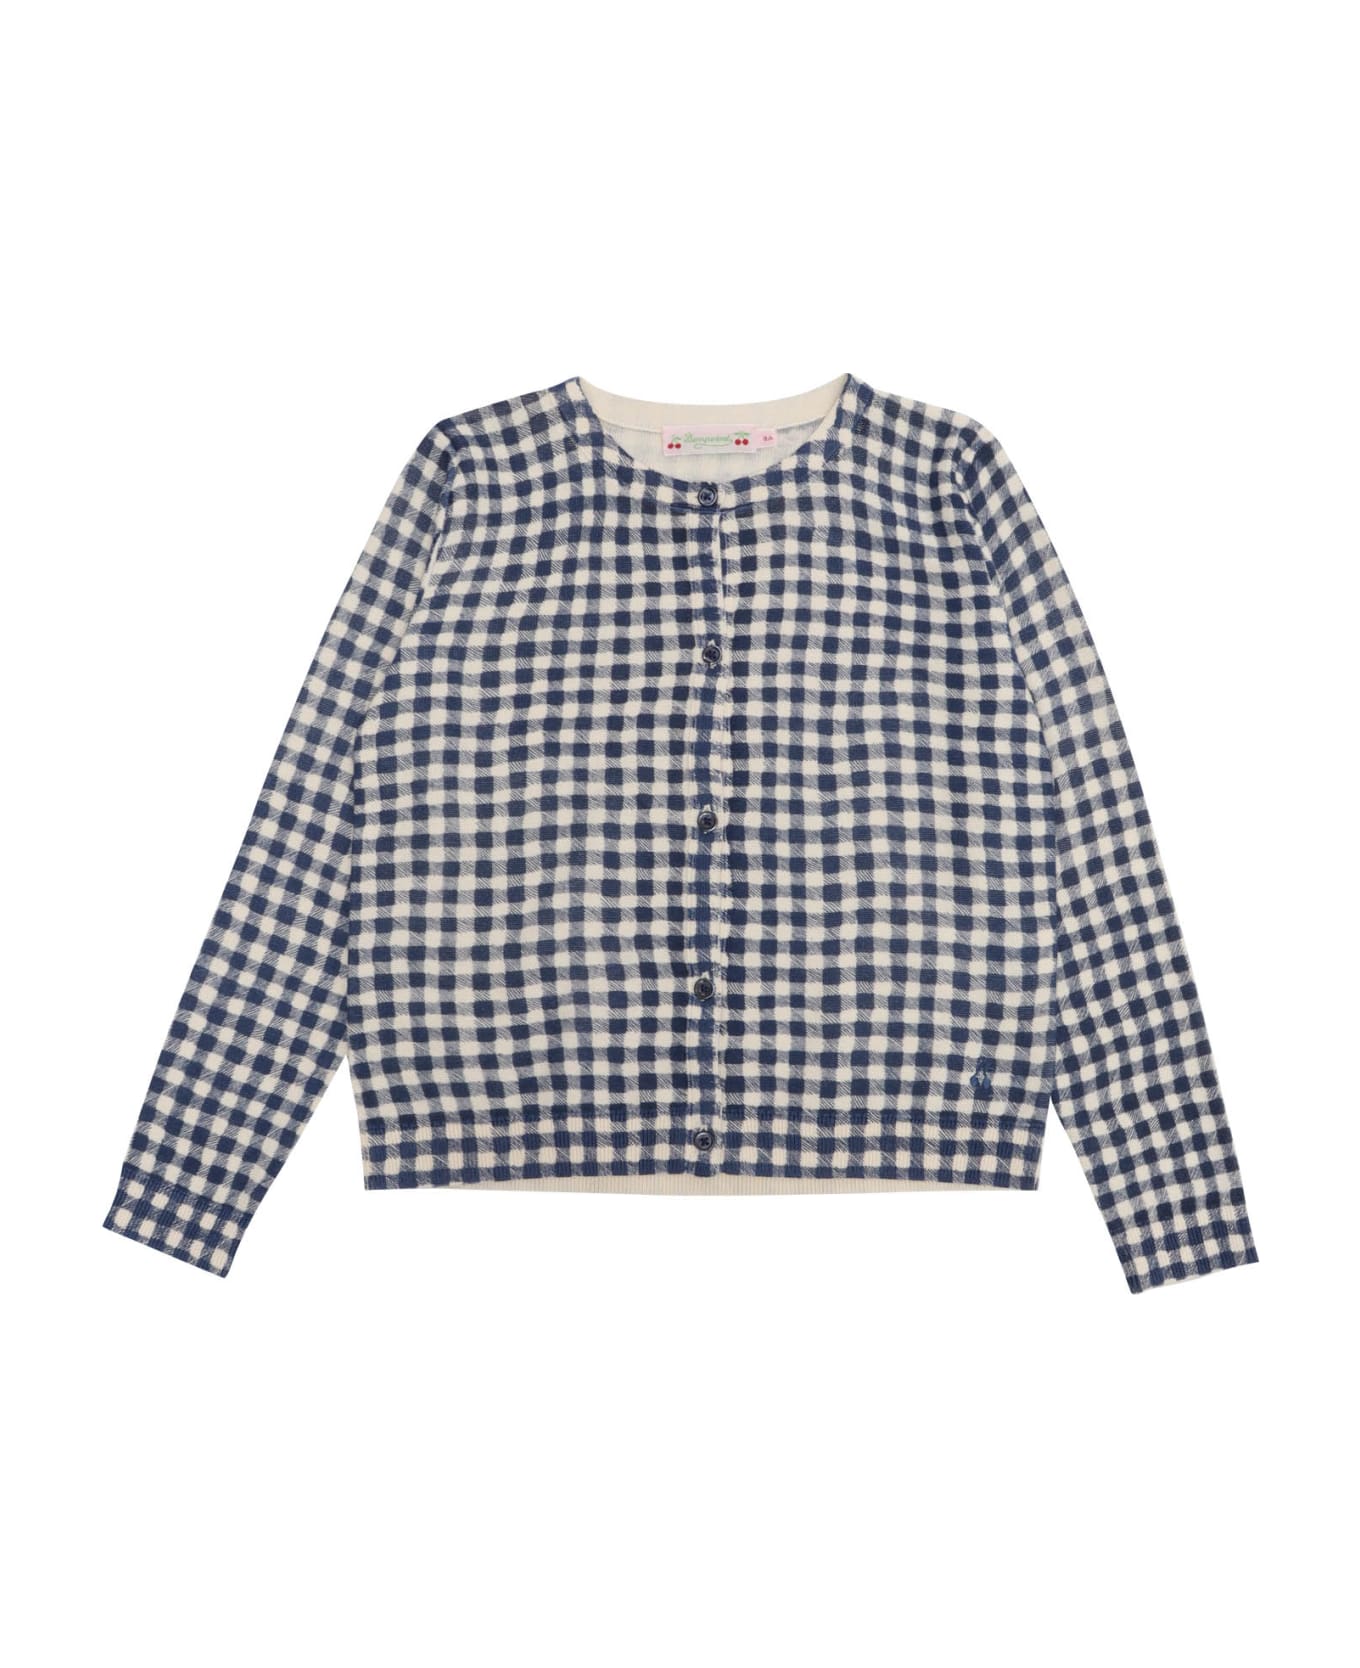 Bonpoint Checked Patterned Cardigan For Girls - BLUE